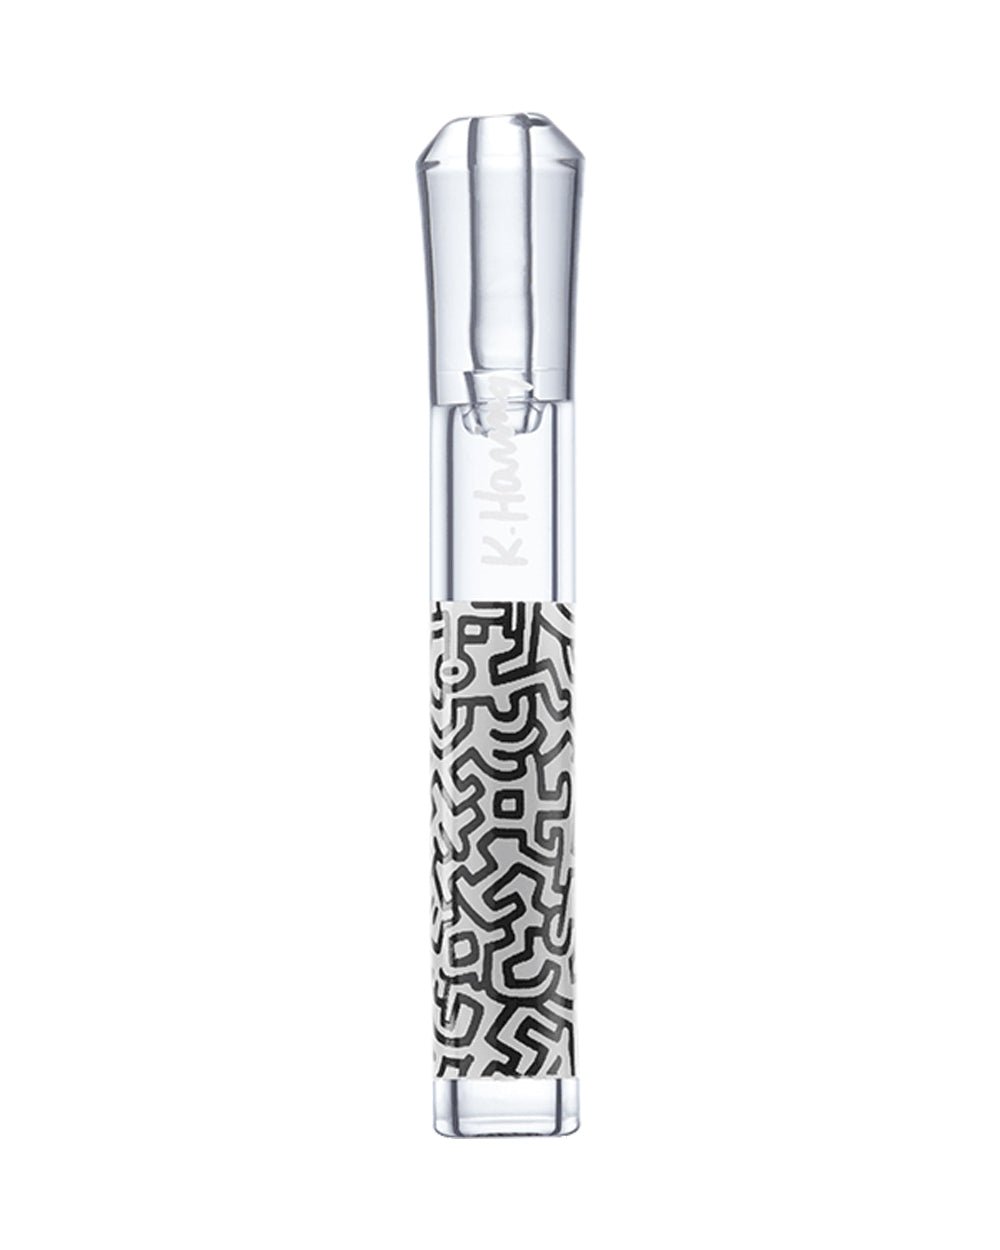 Keith Haring | Glass Taster Chillum Hand Pipe | 3in Long - Glass - Black & White - 9